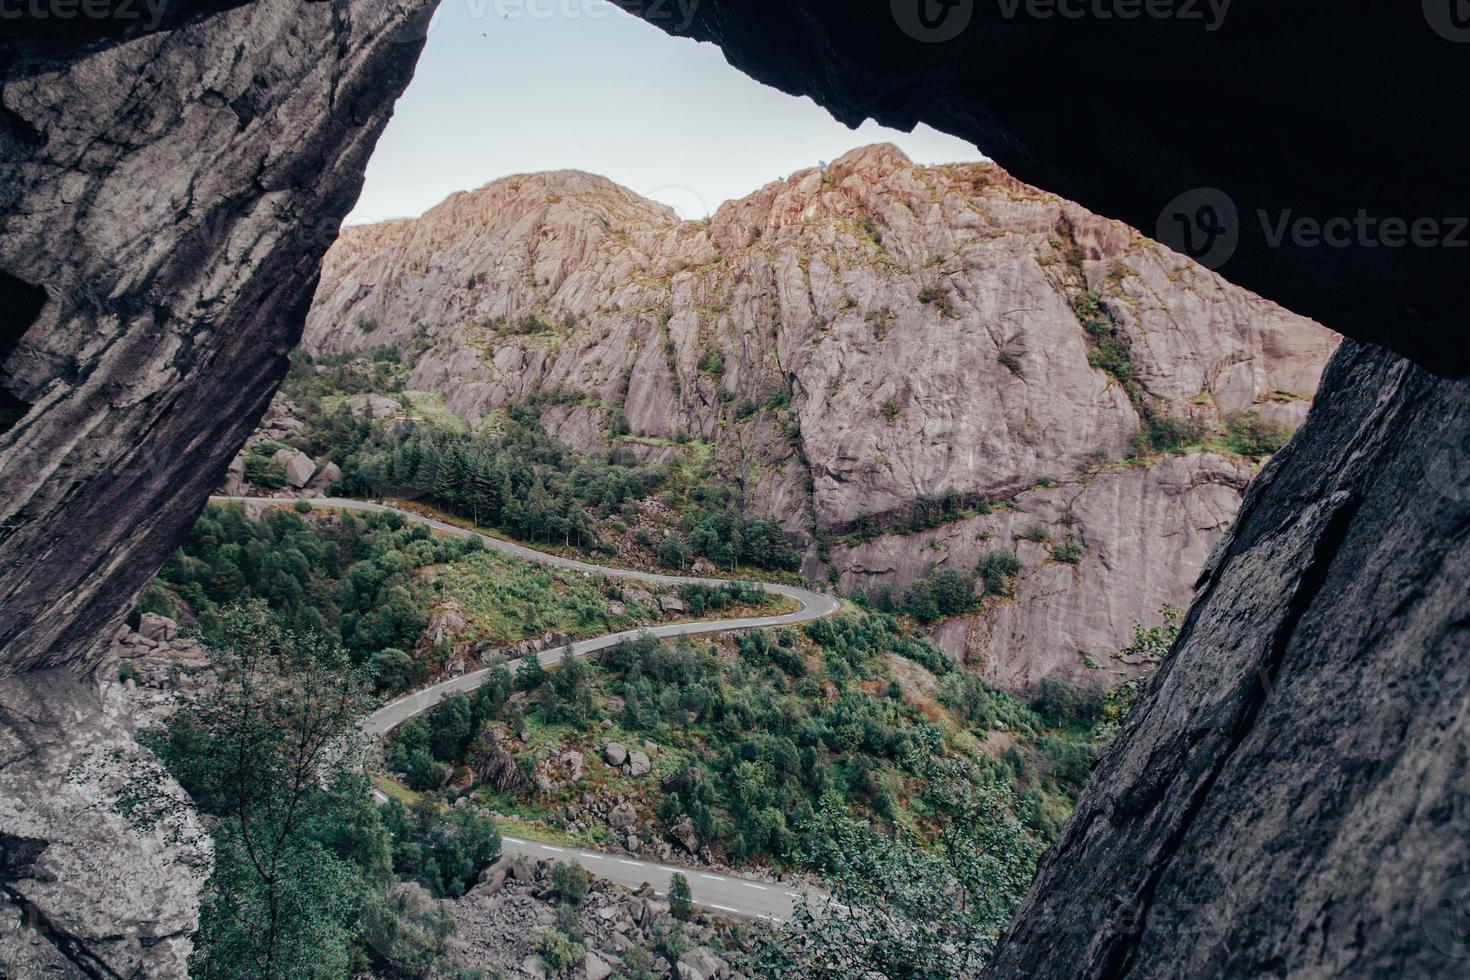 dangerous highways serpentine through the rocky mountains of Norway. photo